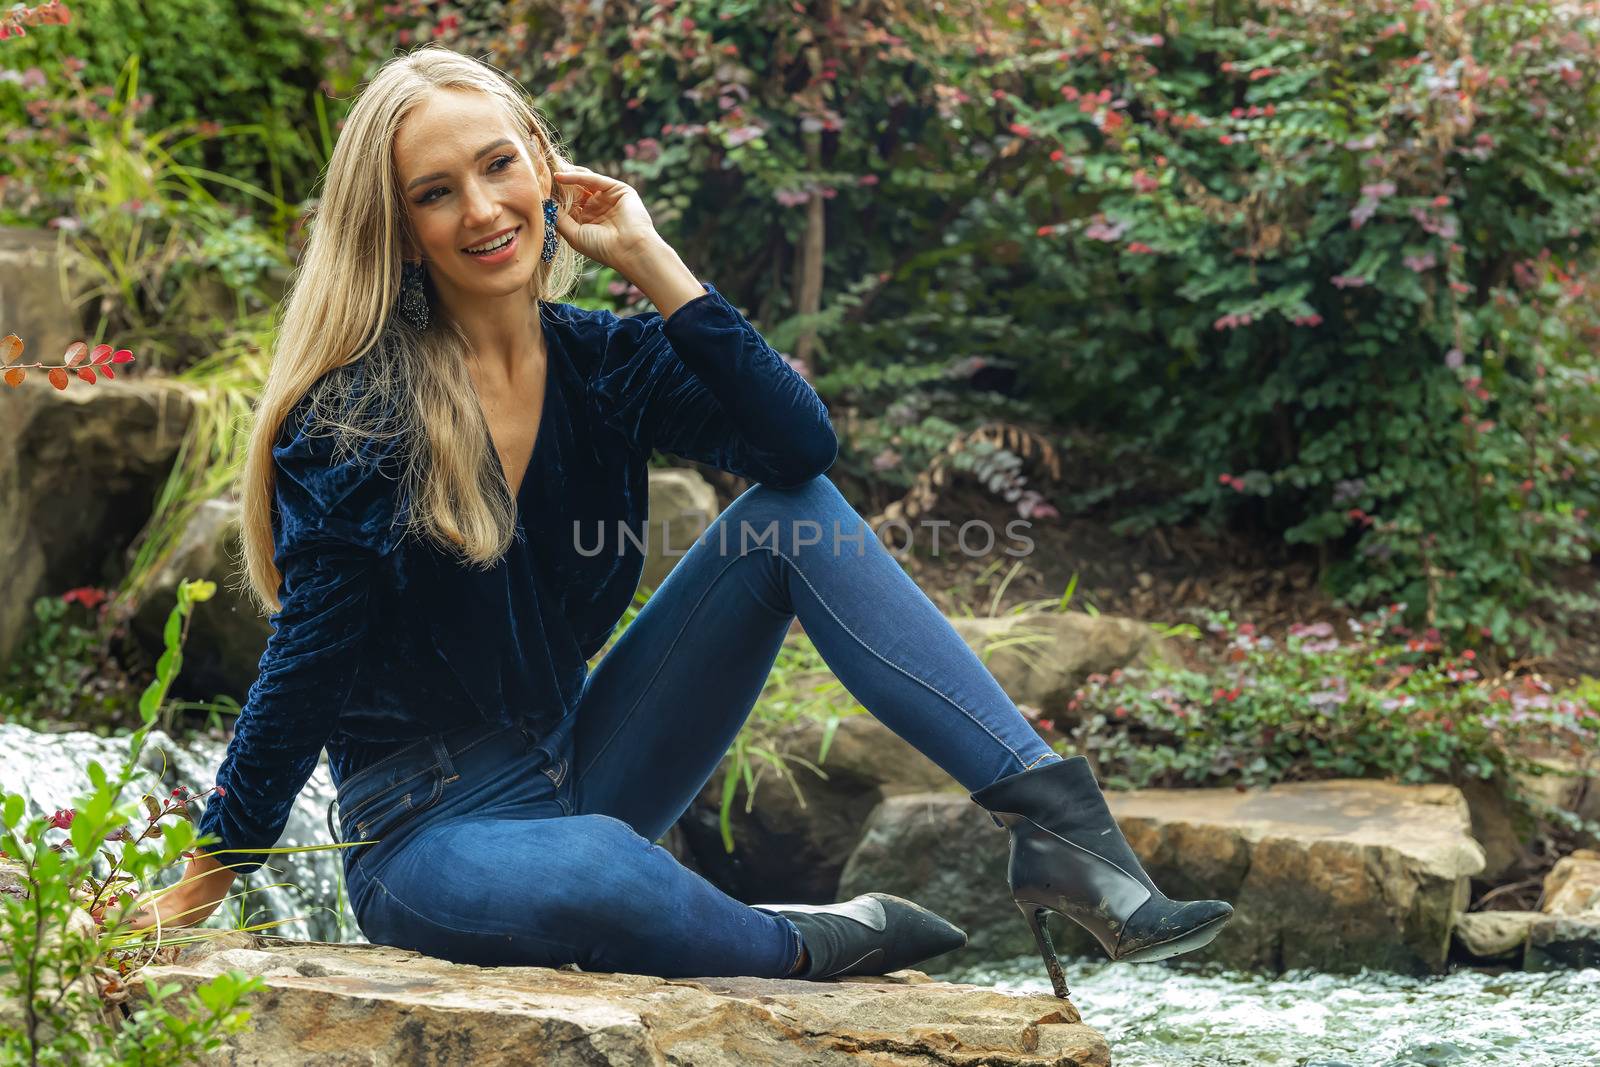 A Lovely Blonde Model Poses In Her Beautiful Fall Clothing by actionsports